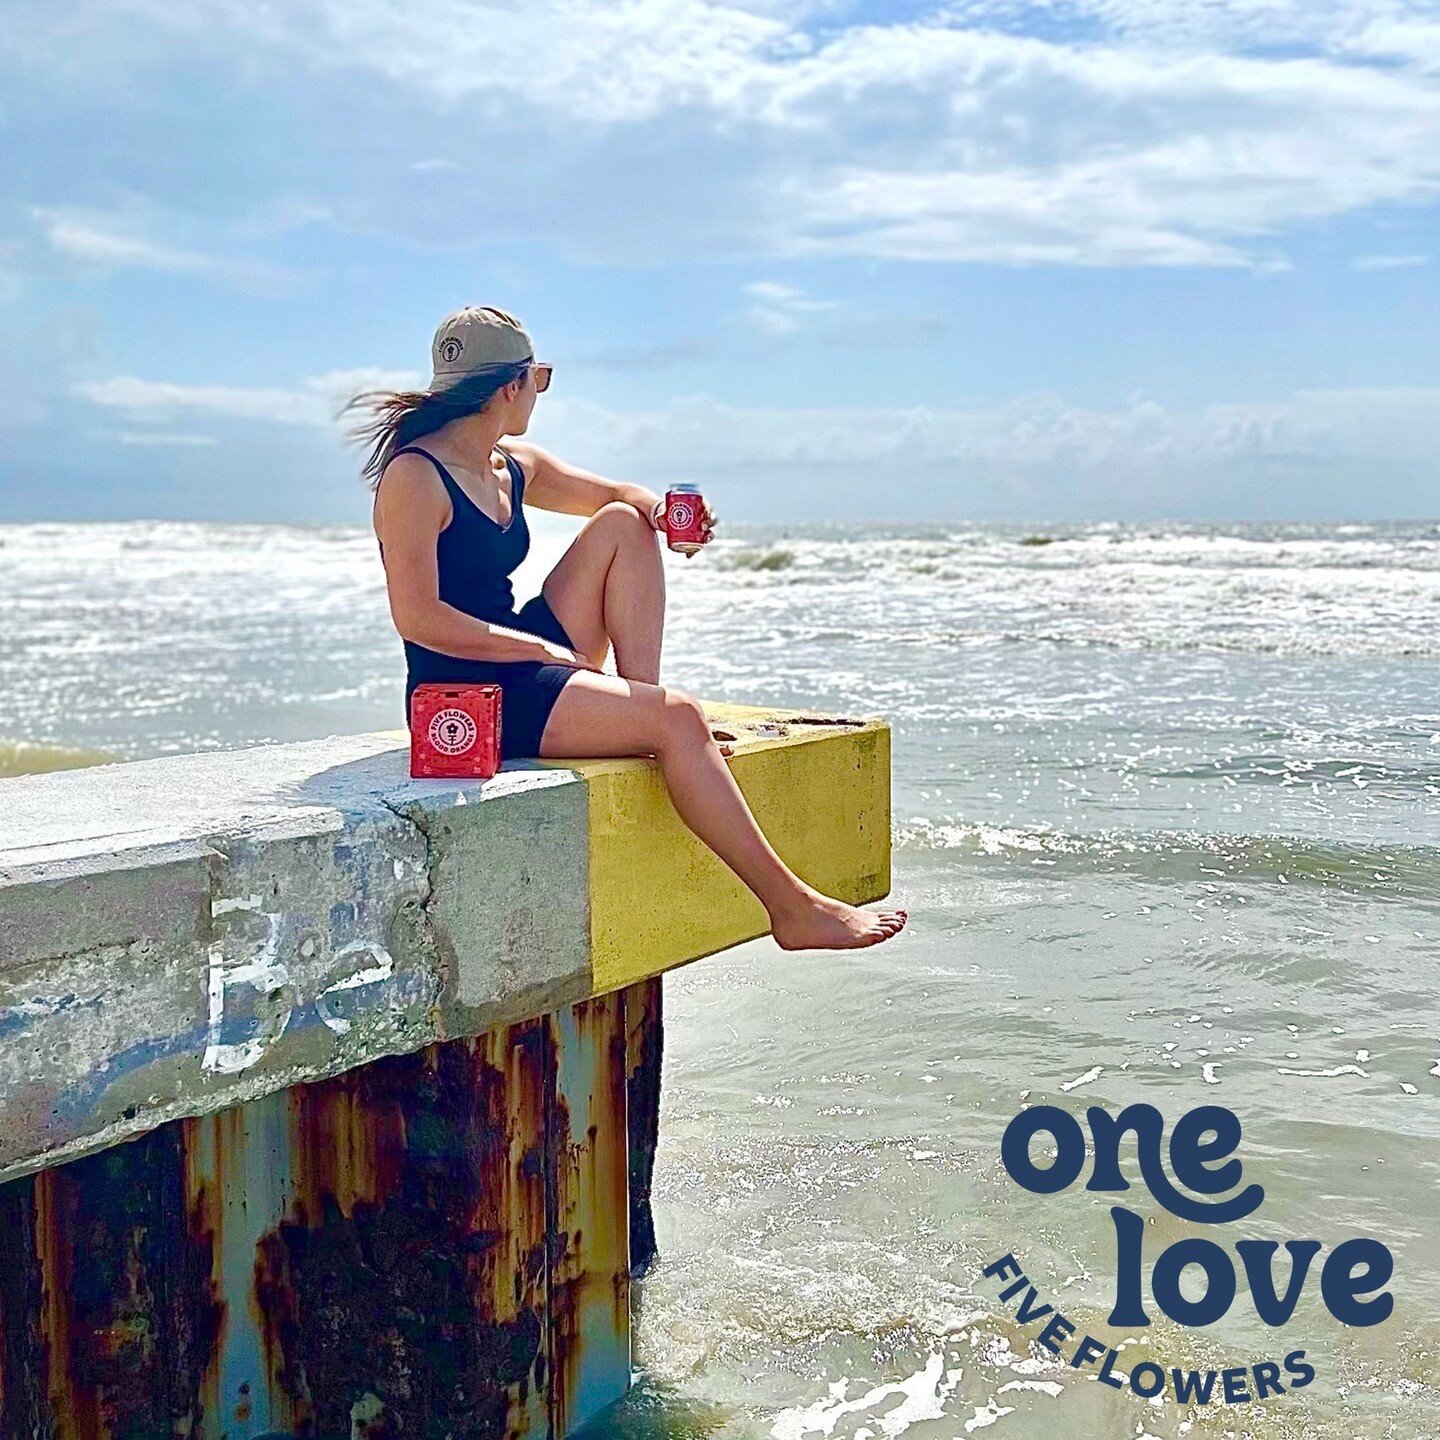 Pier Away 🌊⁠
&bull;⁠
Ahhh&hellip; the wind, the smells, the fresh air. Is your &ldquo;One Love&rdquo; taking in all that the beach has to offer? Whatever your love, enjoy it more with Five Flowers.⁠
&bull;⁠
&bull;⁠
#onecarolina #charlotte #charlotte